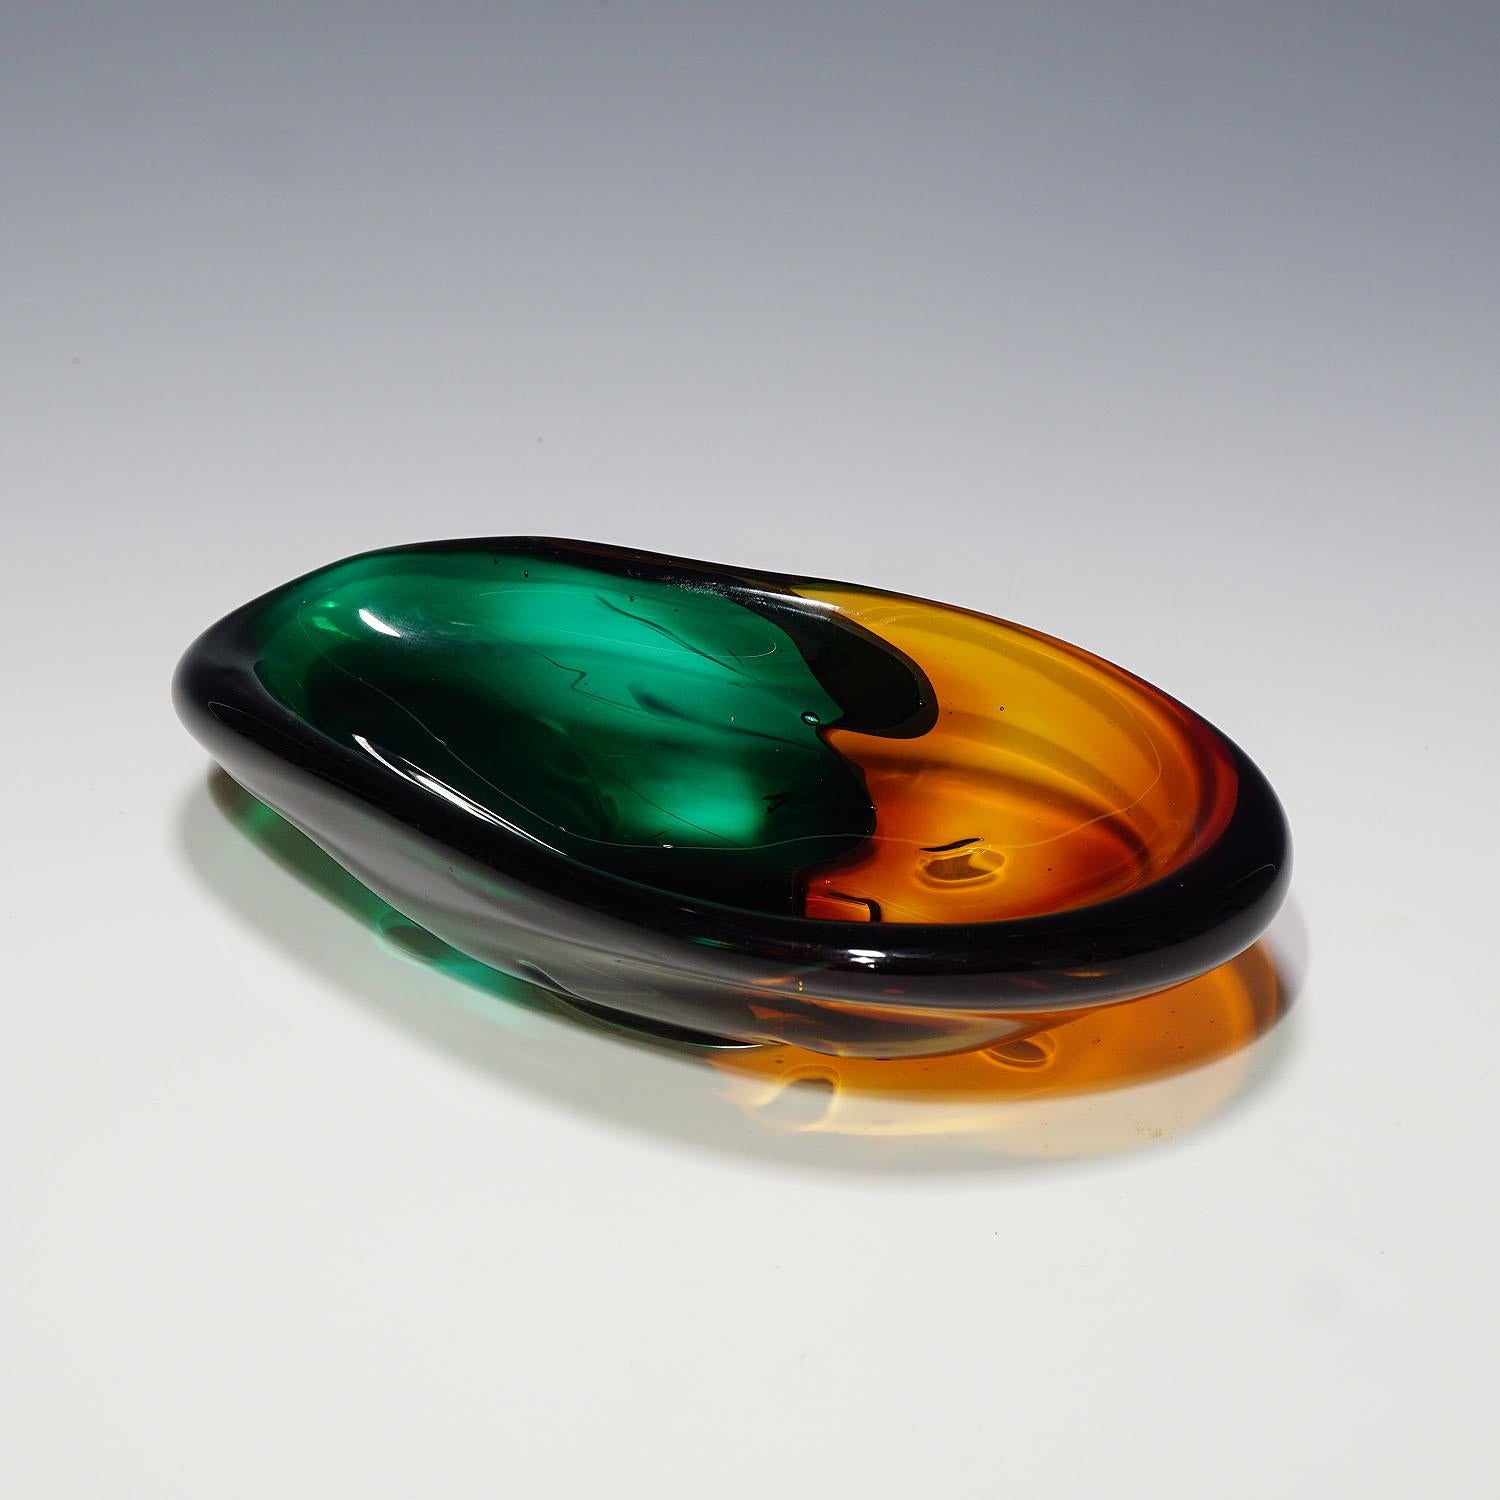 A vintage glass bowl in 1950 style with thick overlapping green and orange glass and clear glass overlay. Signed on the base 'salviati venezia'. Manufactured in Murano circa 1960.

Measures: Length 7.68